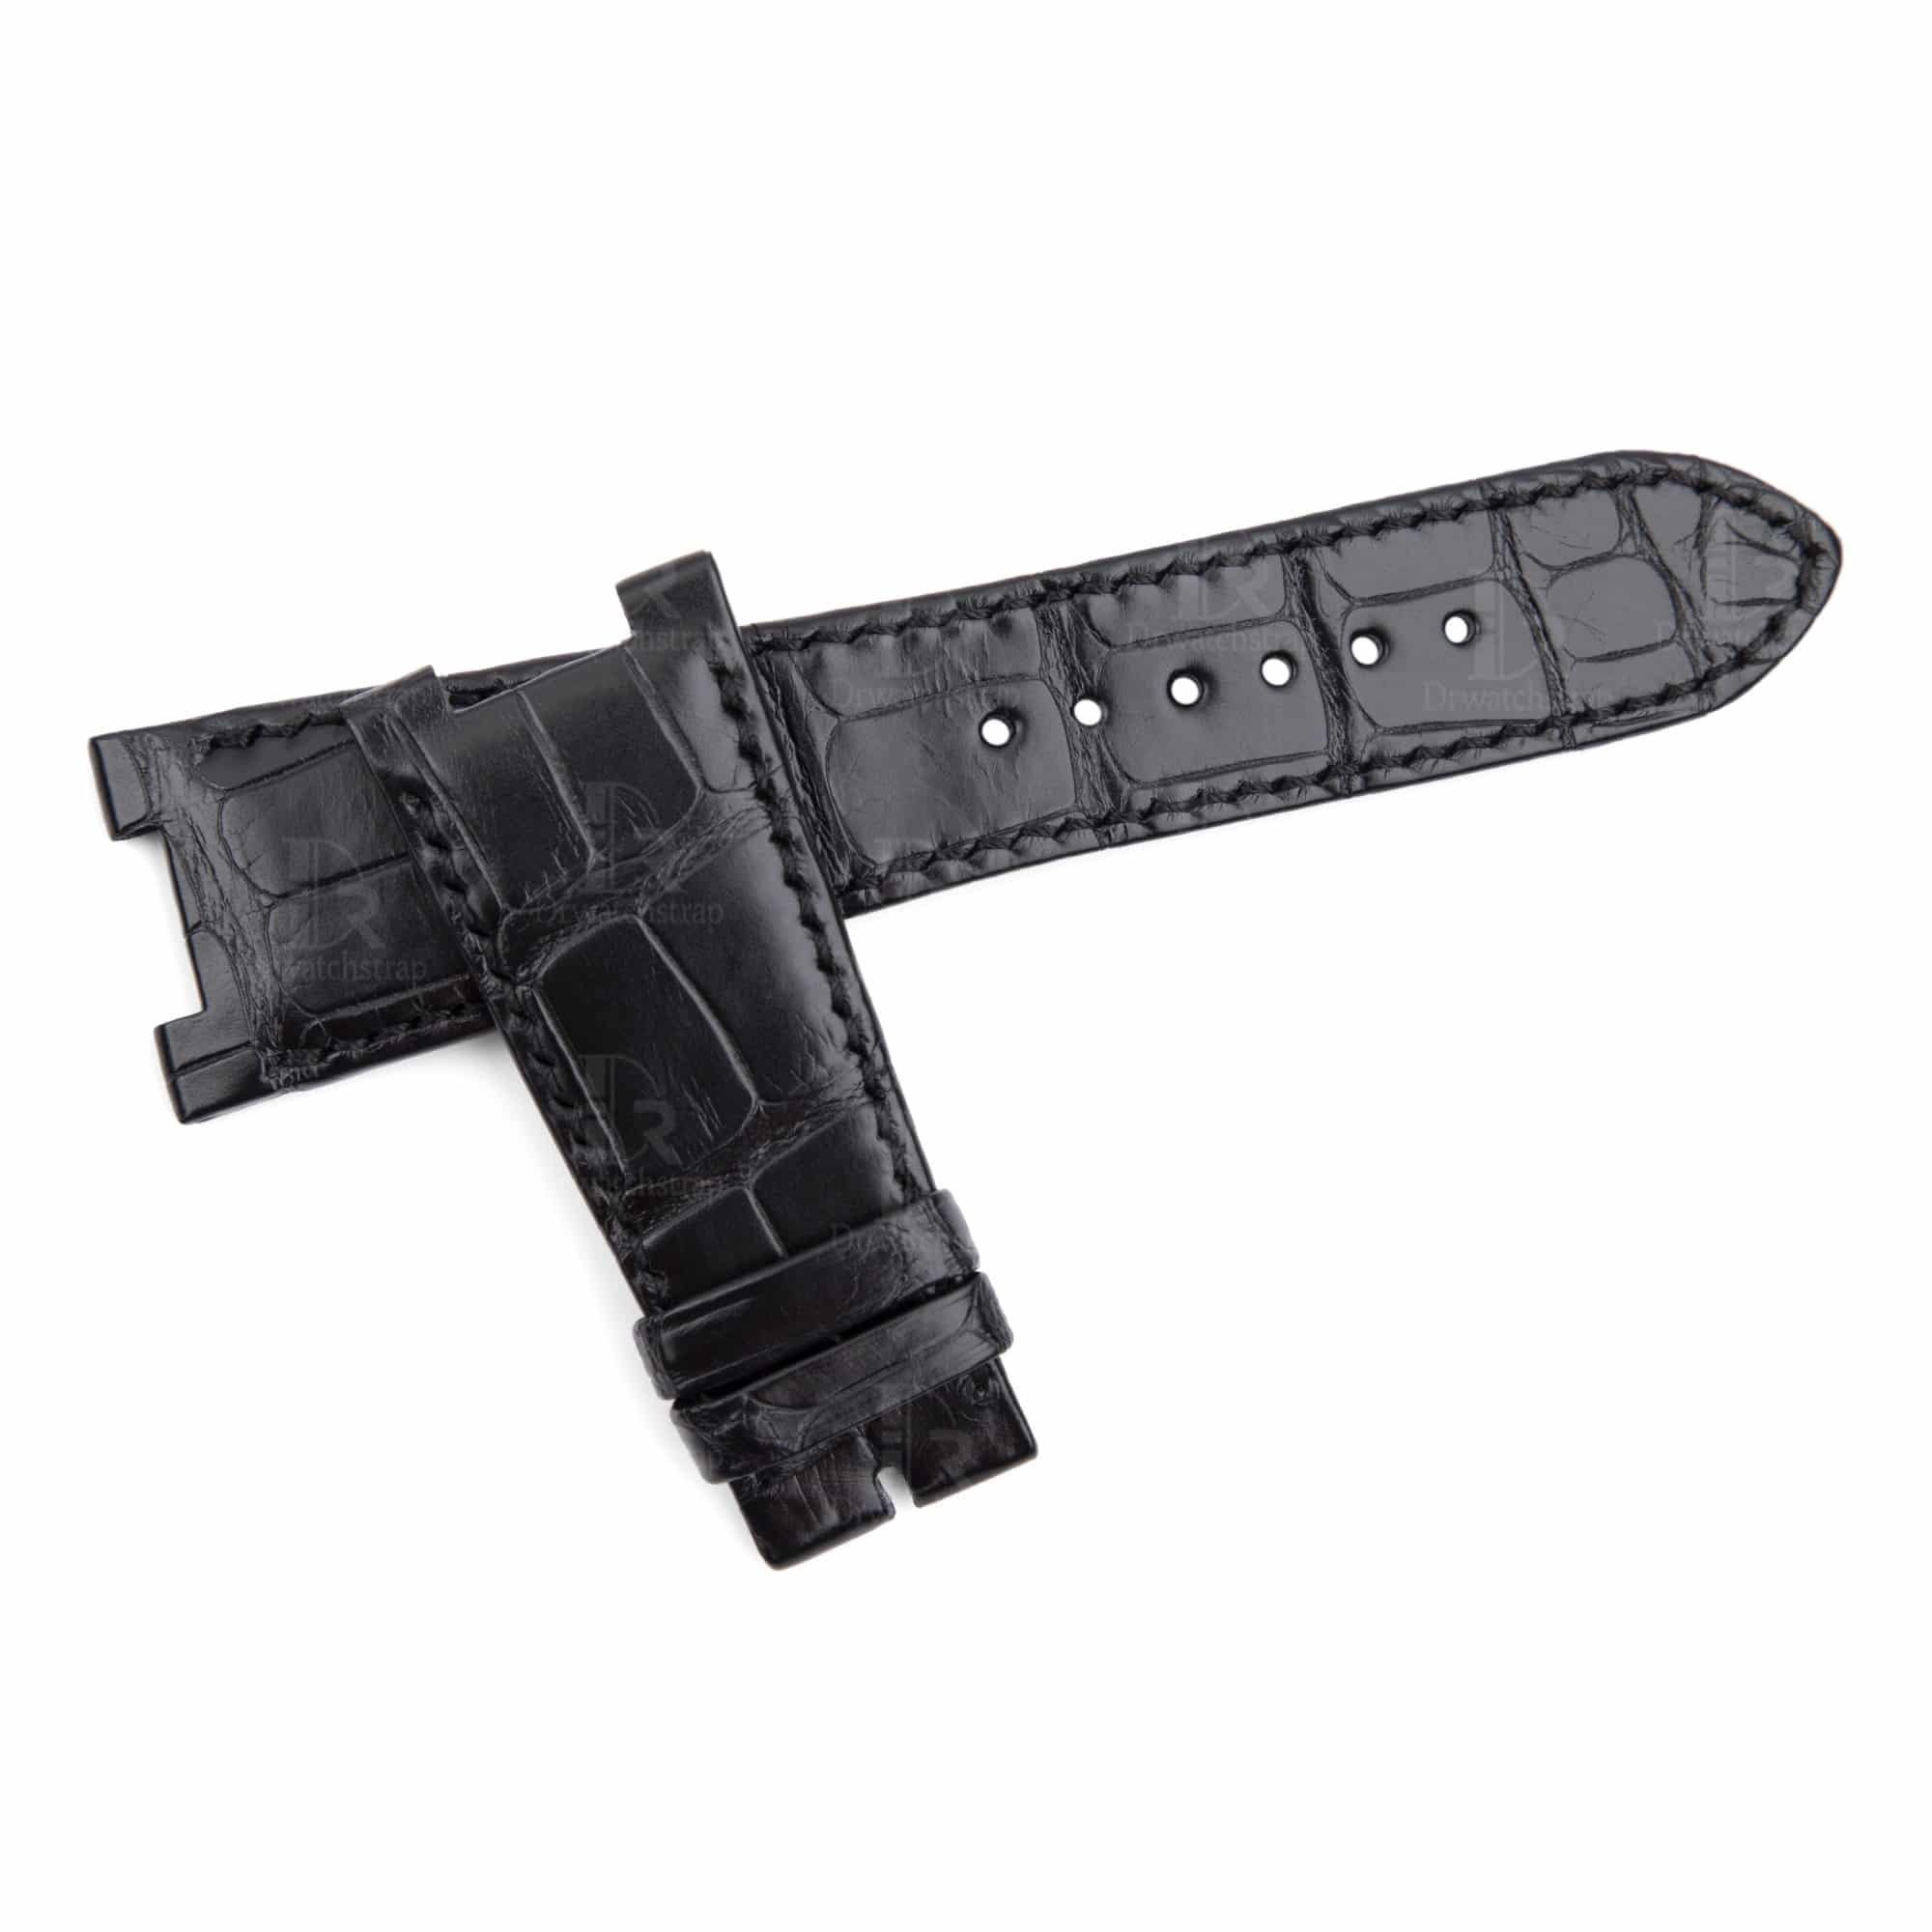 Replacement Patek Philippe Nautilus 5711 leather strap for sale - 25mm Lug Size Custom handmade American Alligator Black leather watch band